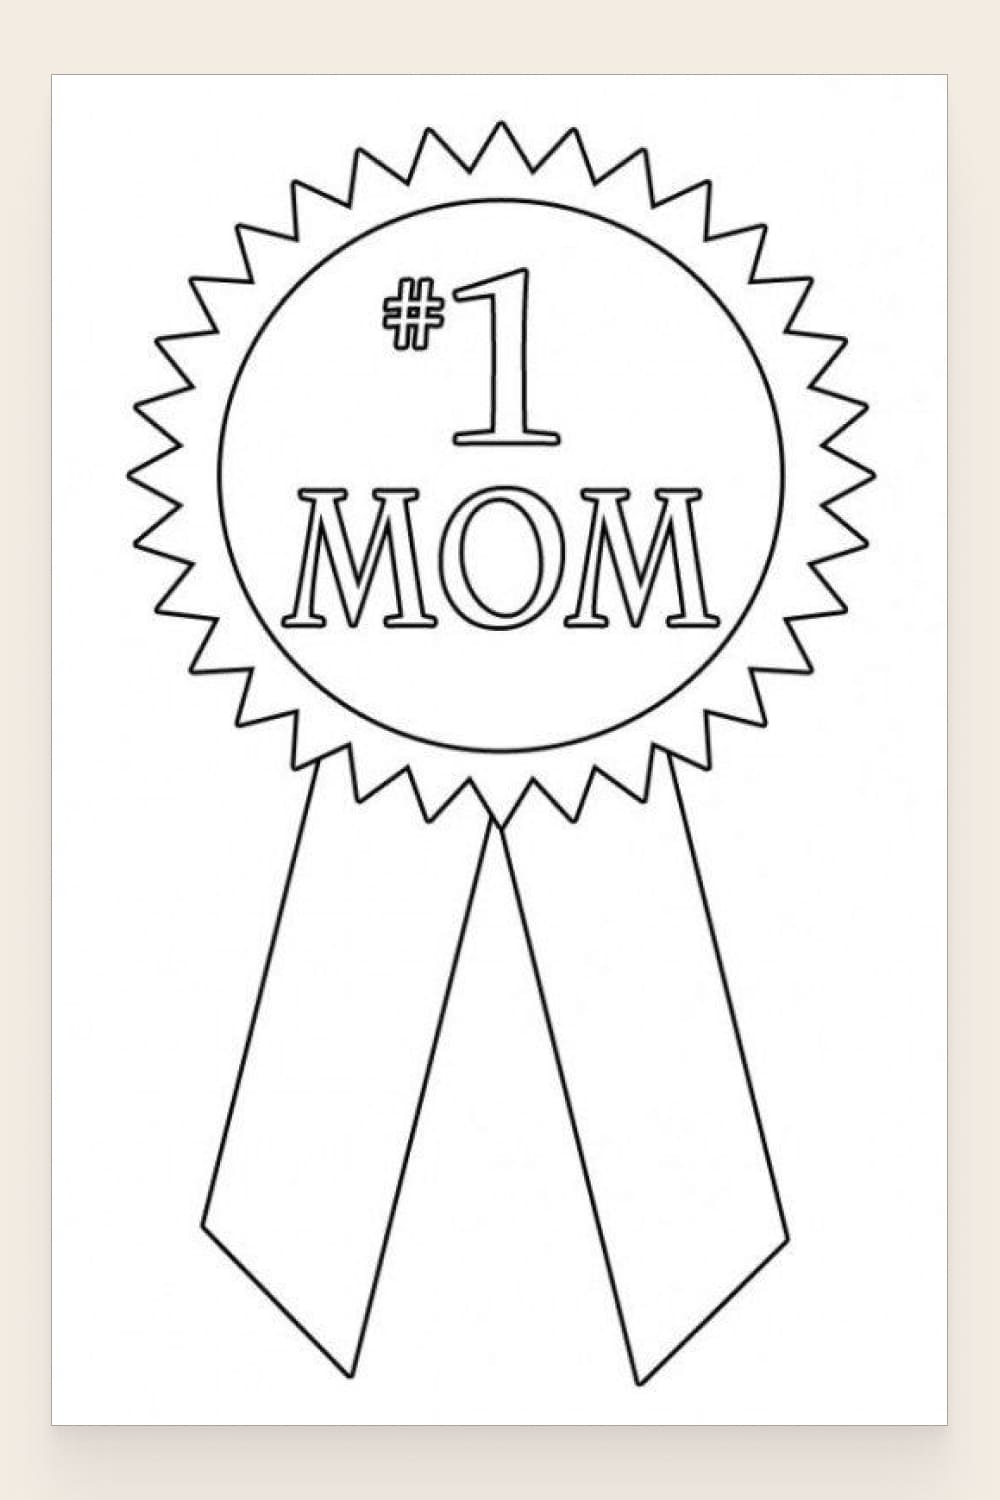 Black and white clipart in the form of an icon #1 Mom.